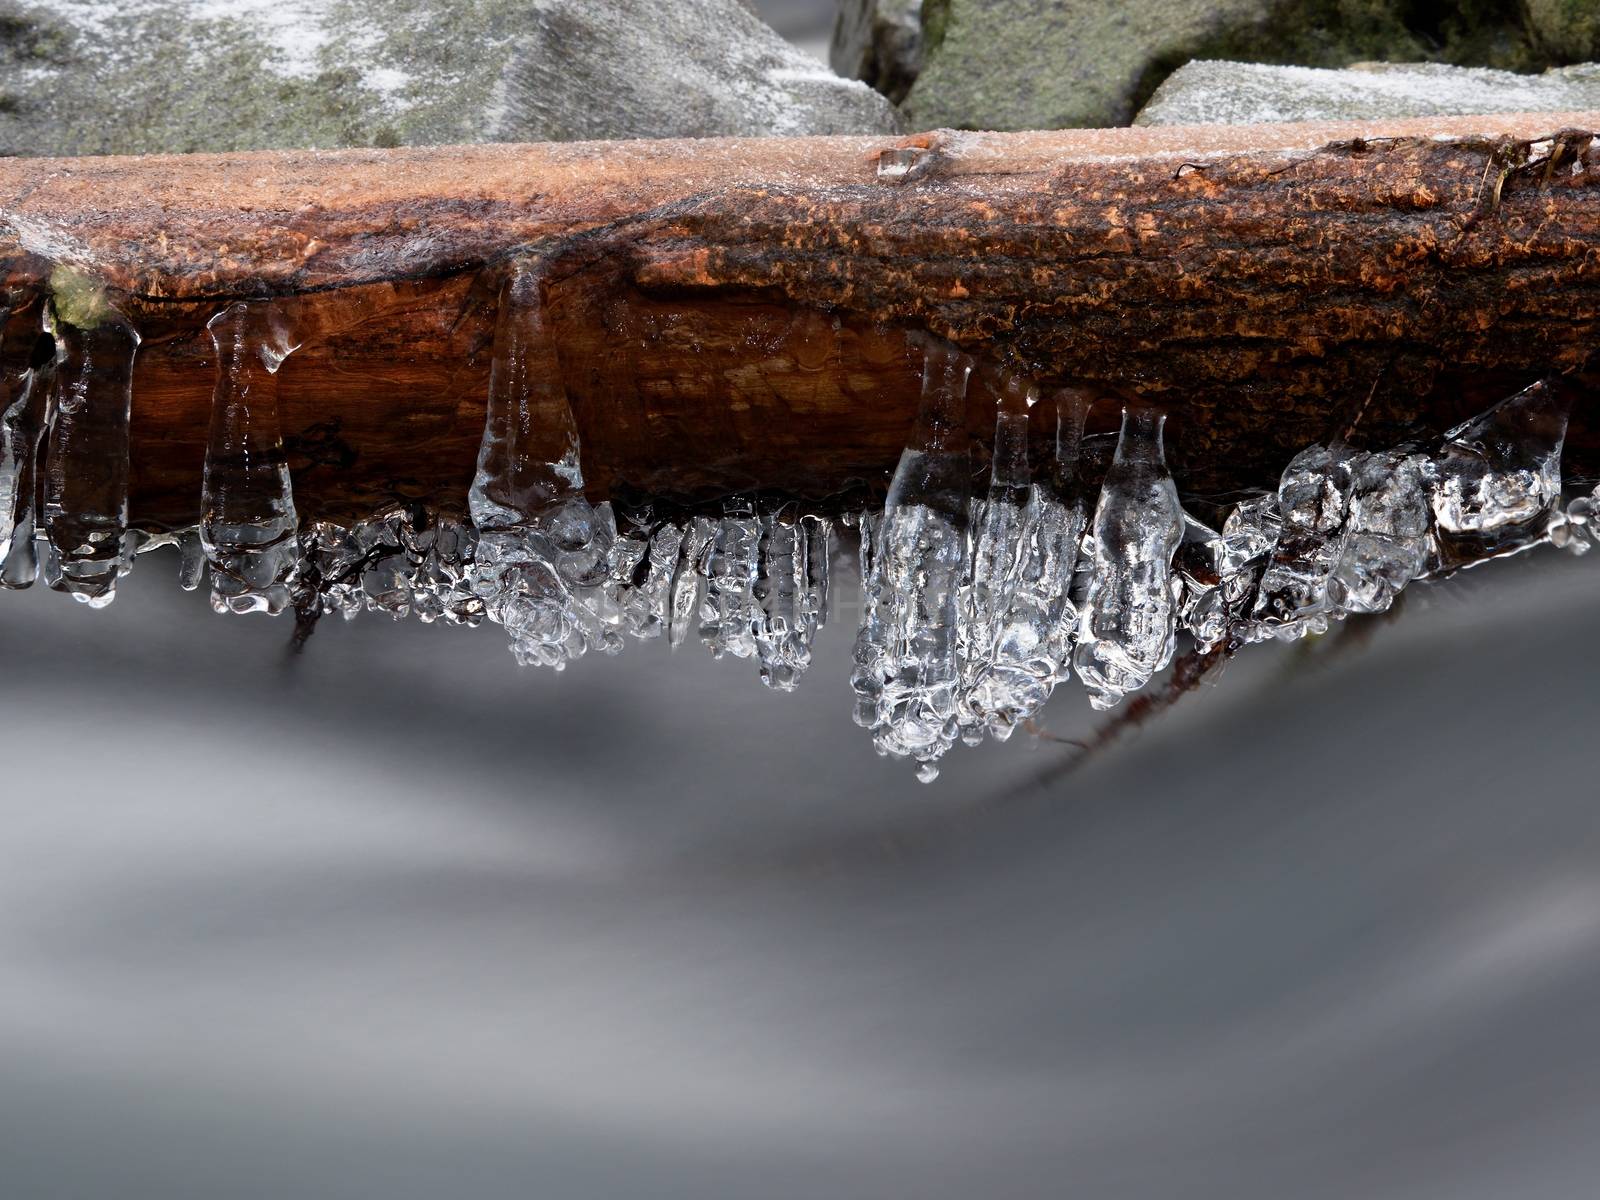 Icy branches above  chilling stream. Bright reflections in icicles, blur white foam on water level. Icy art